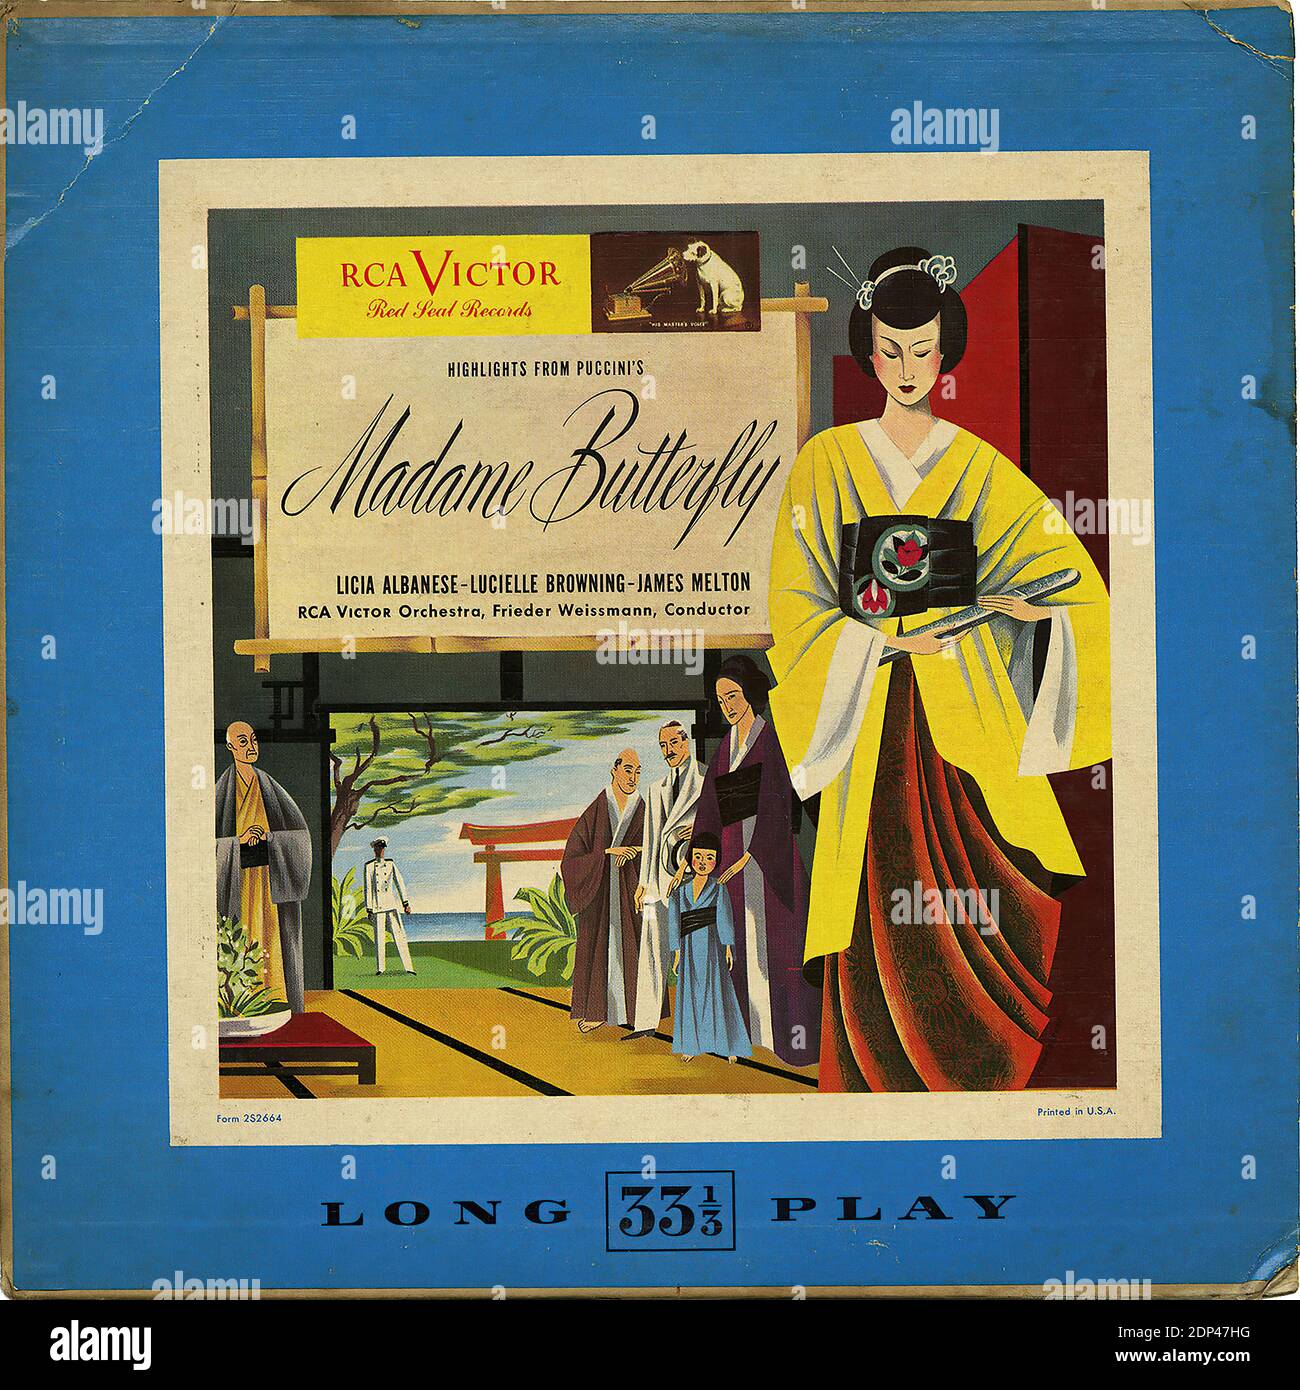 Highlights von Madame Butterfly - Vintage Record Cover Stockfoto